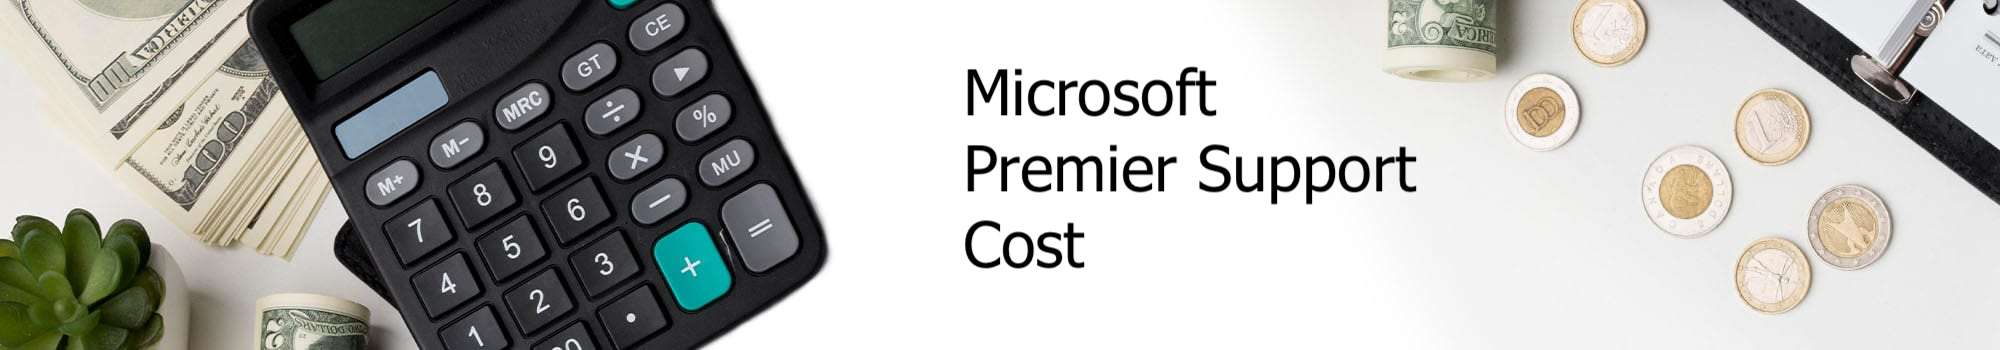 Cost of Microsoft Premier Support